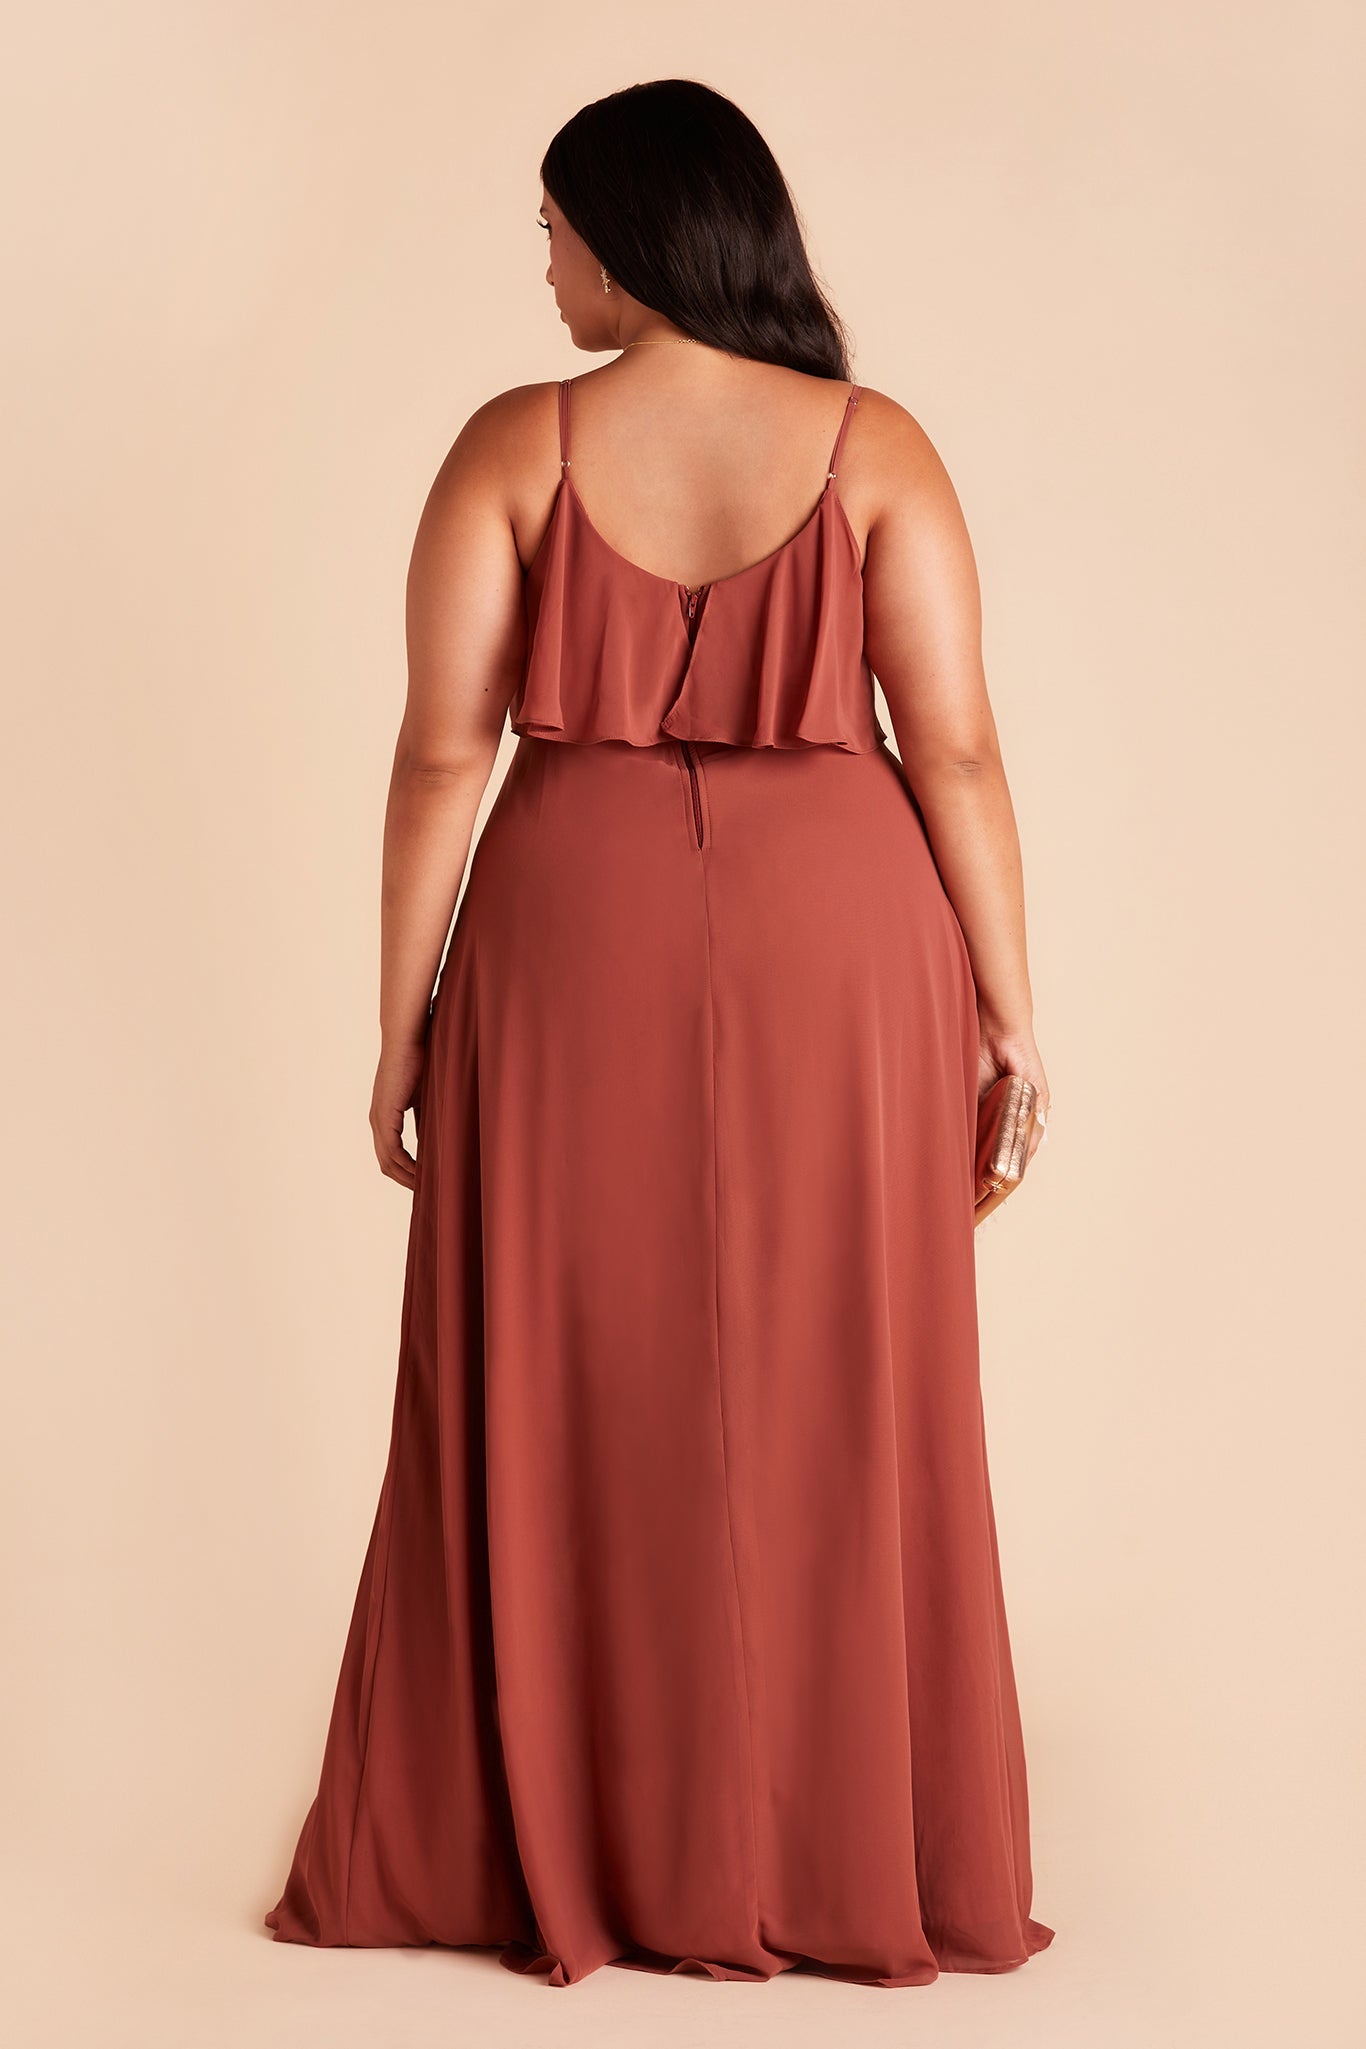 Jane convertible plus size bridesmaid dress with slit in spice chiffon by Birdy Grey, back view